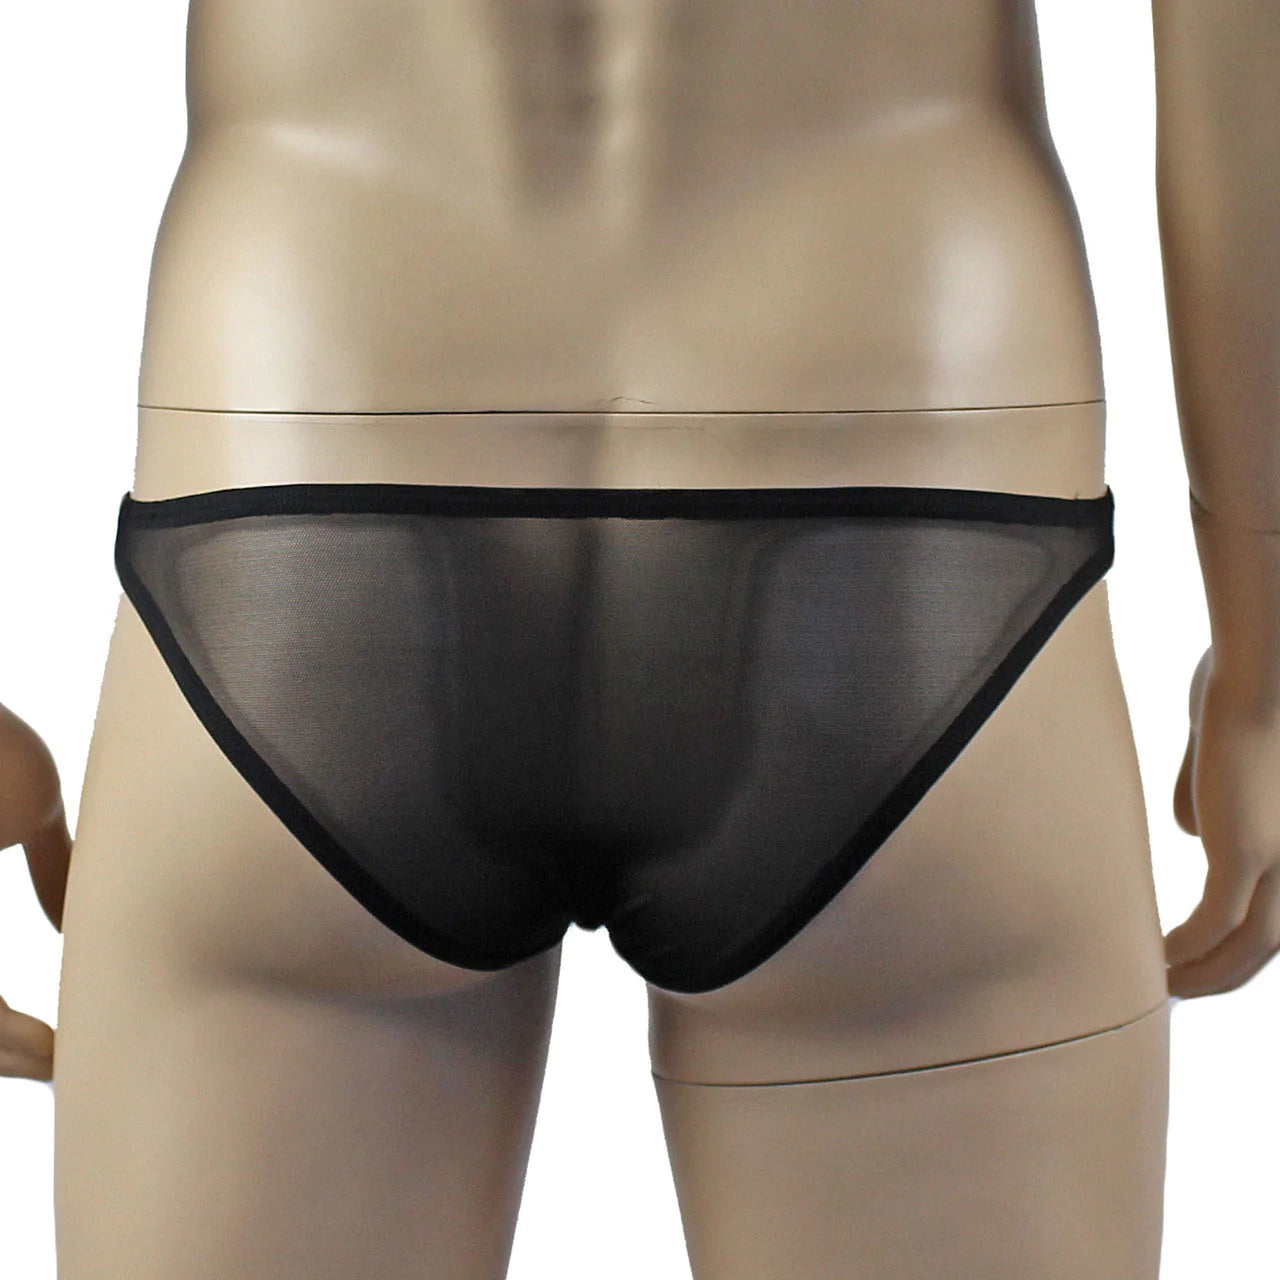 SALE - Mens Exotic Sheer Mesh Brief with Bow Front Black